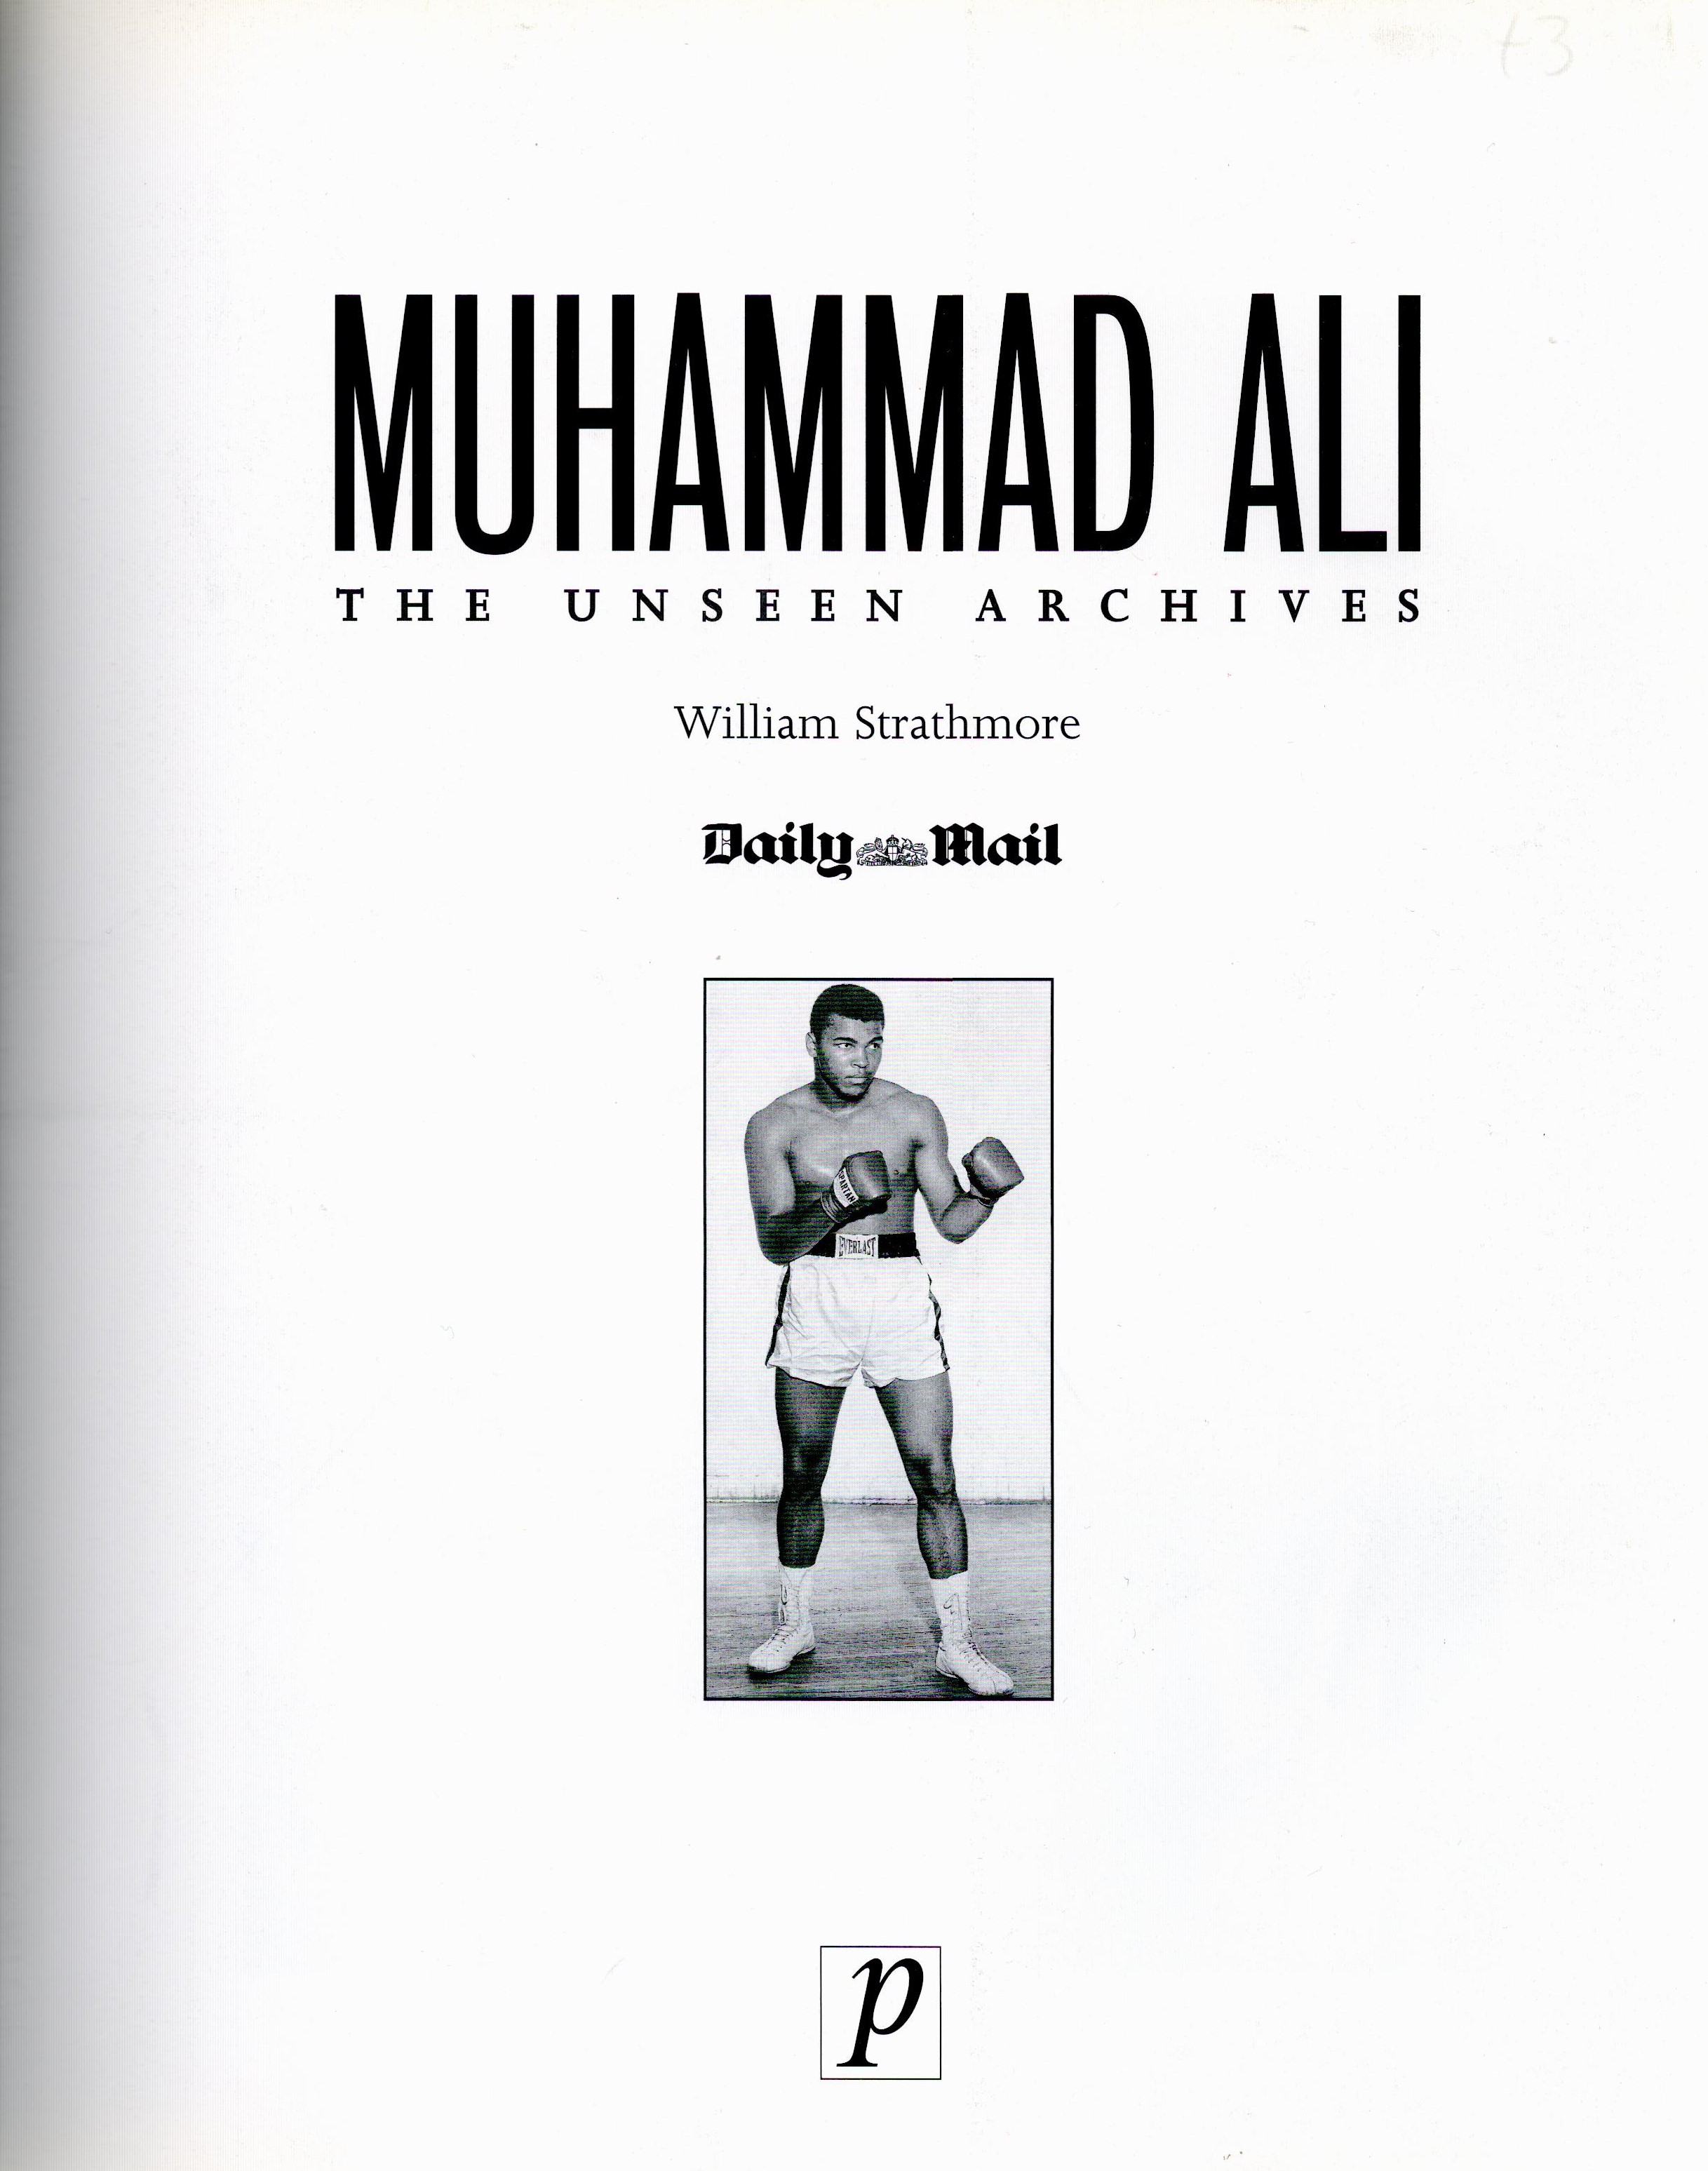 Muhammad Ali - The Unseen Archives by William Strathmore 2001 First Edition Softback Book - Image 2 of 3